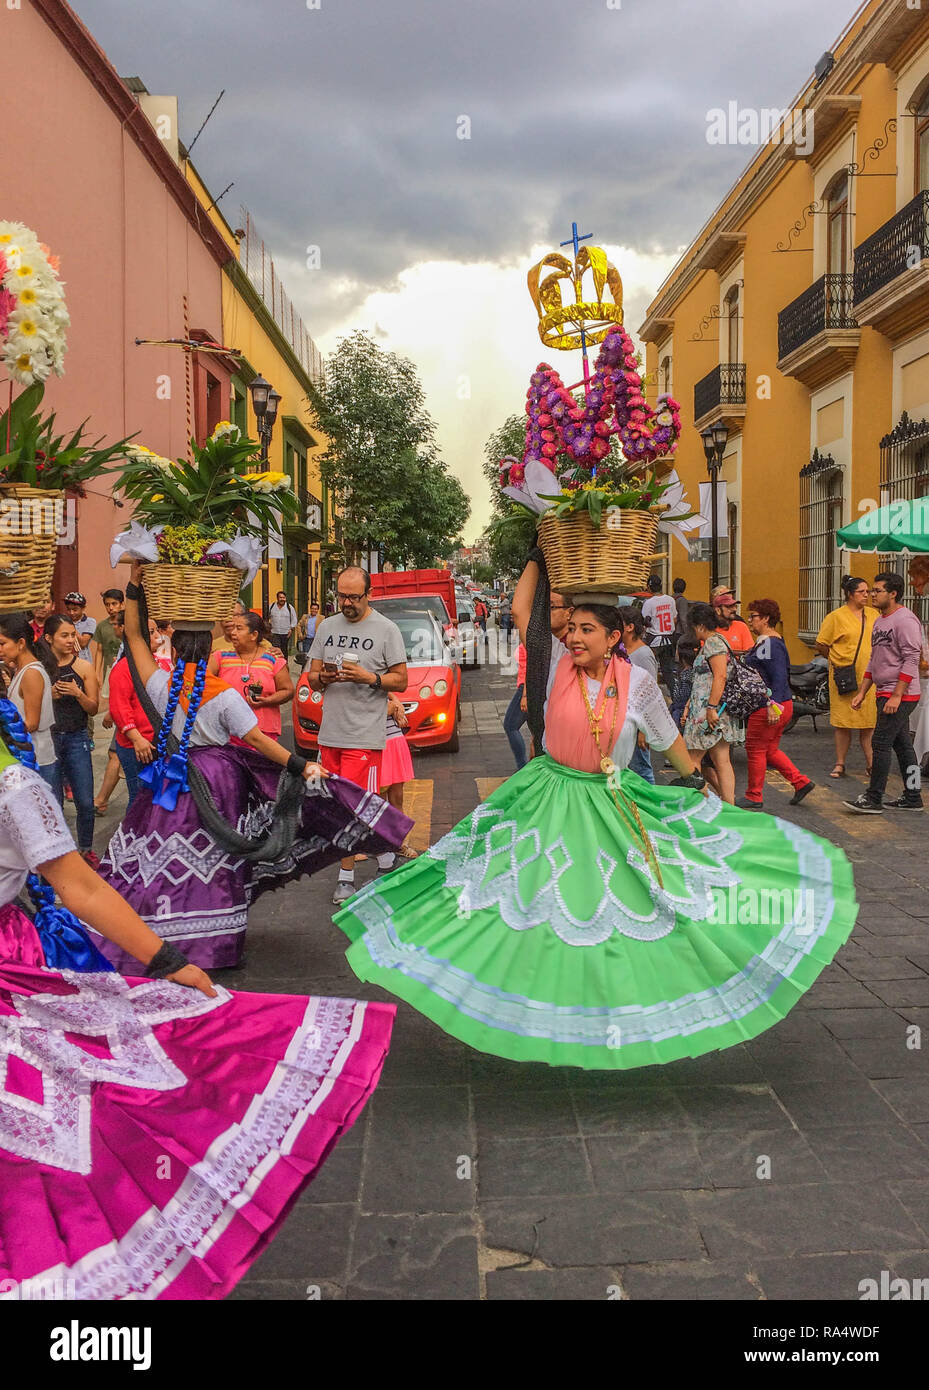 Beautiful dancers in colorful traditional dresses and head baskets, dancing  on the street during a Guelaguetza parade, in Oaxaca, Mexico Stock Photo -  Alamy